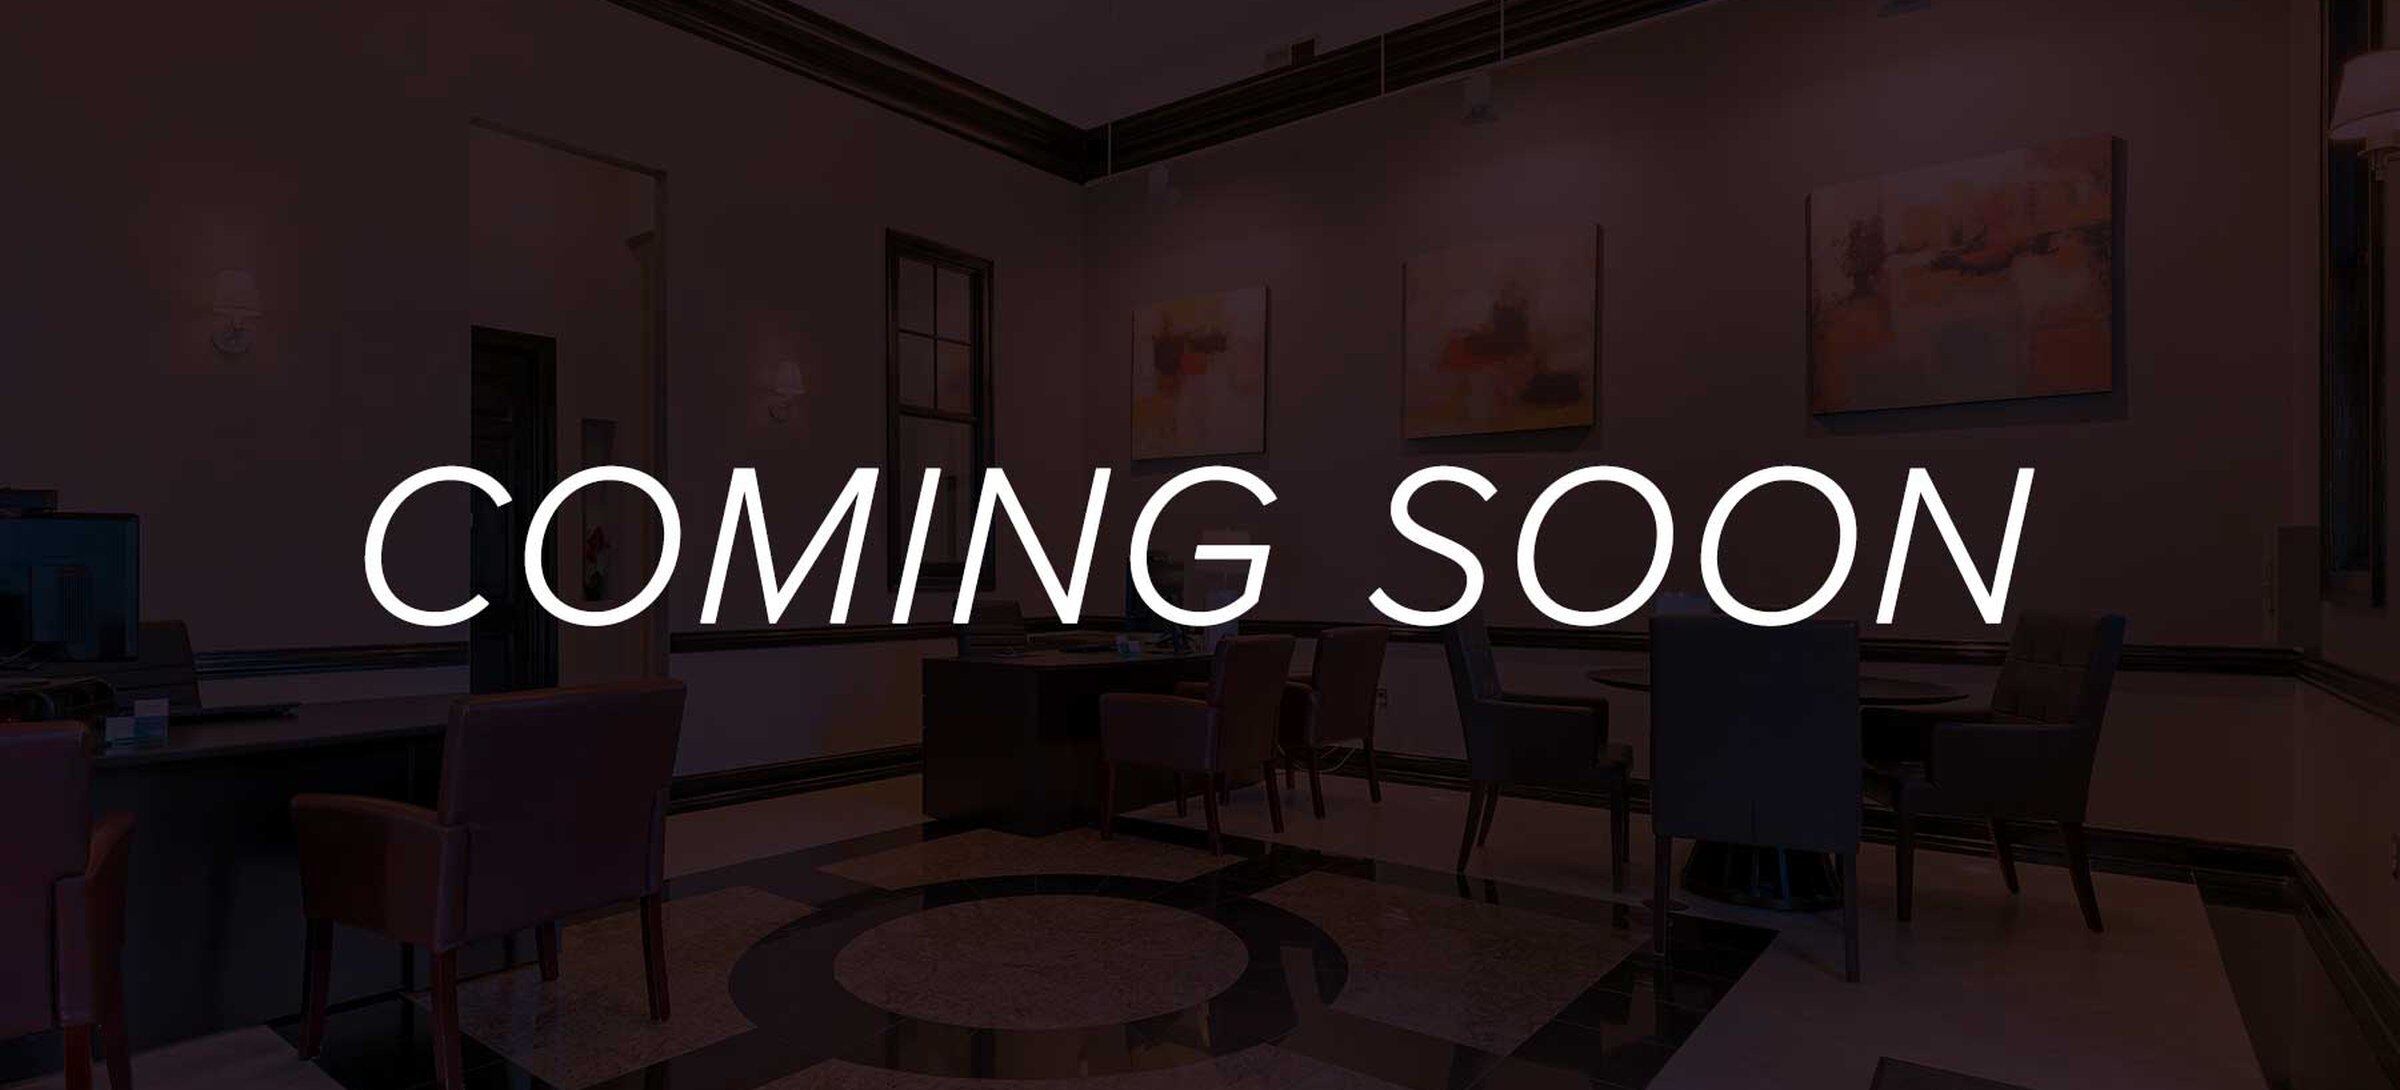 Coming soon - Renovated lobby and leasing office